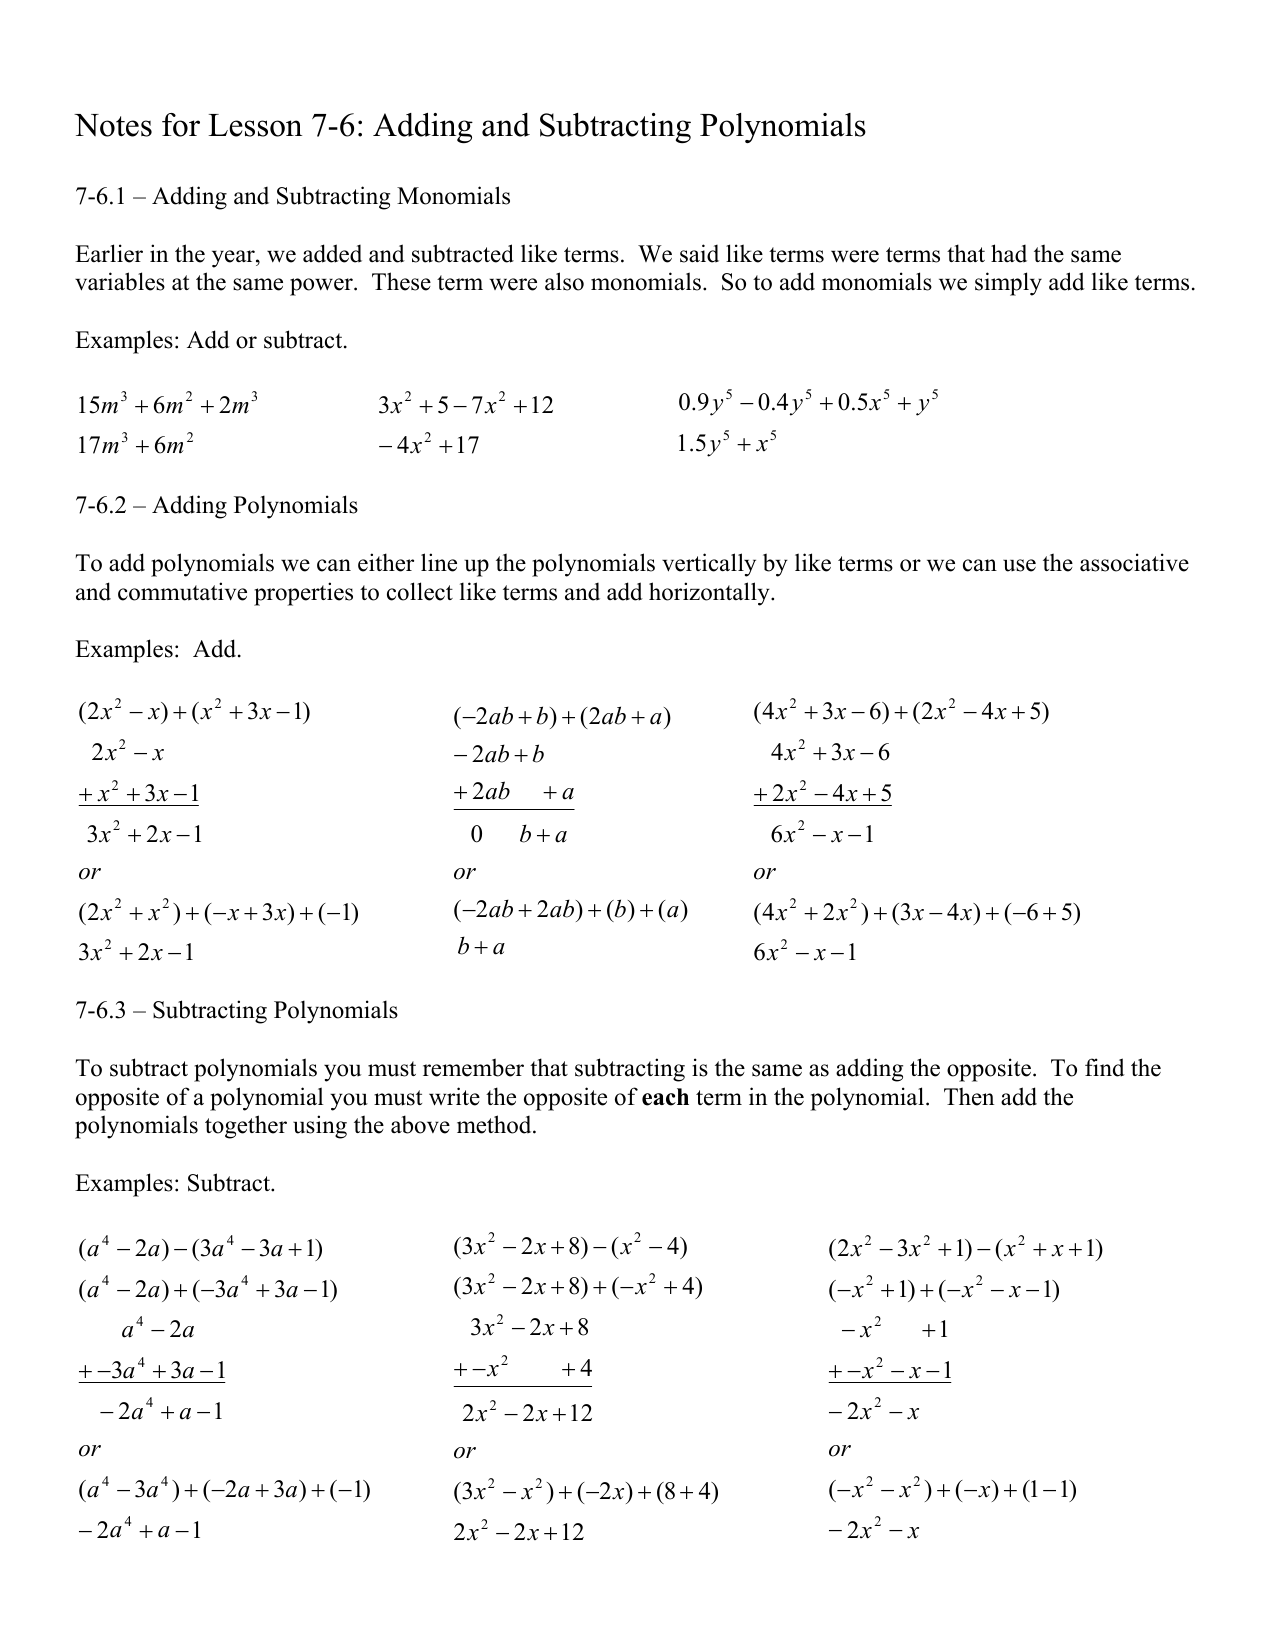 Notes for Lesson 21-21: Adding and Subtracting Polynomials Throughout Adding Subtracting Polynomials Worksheet